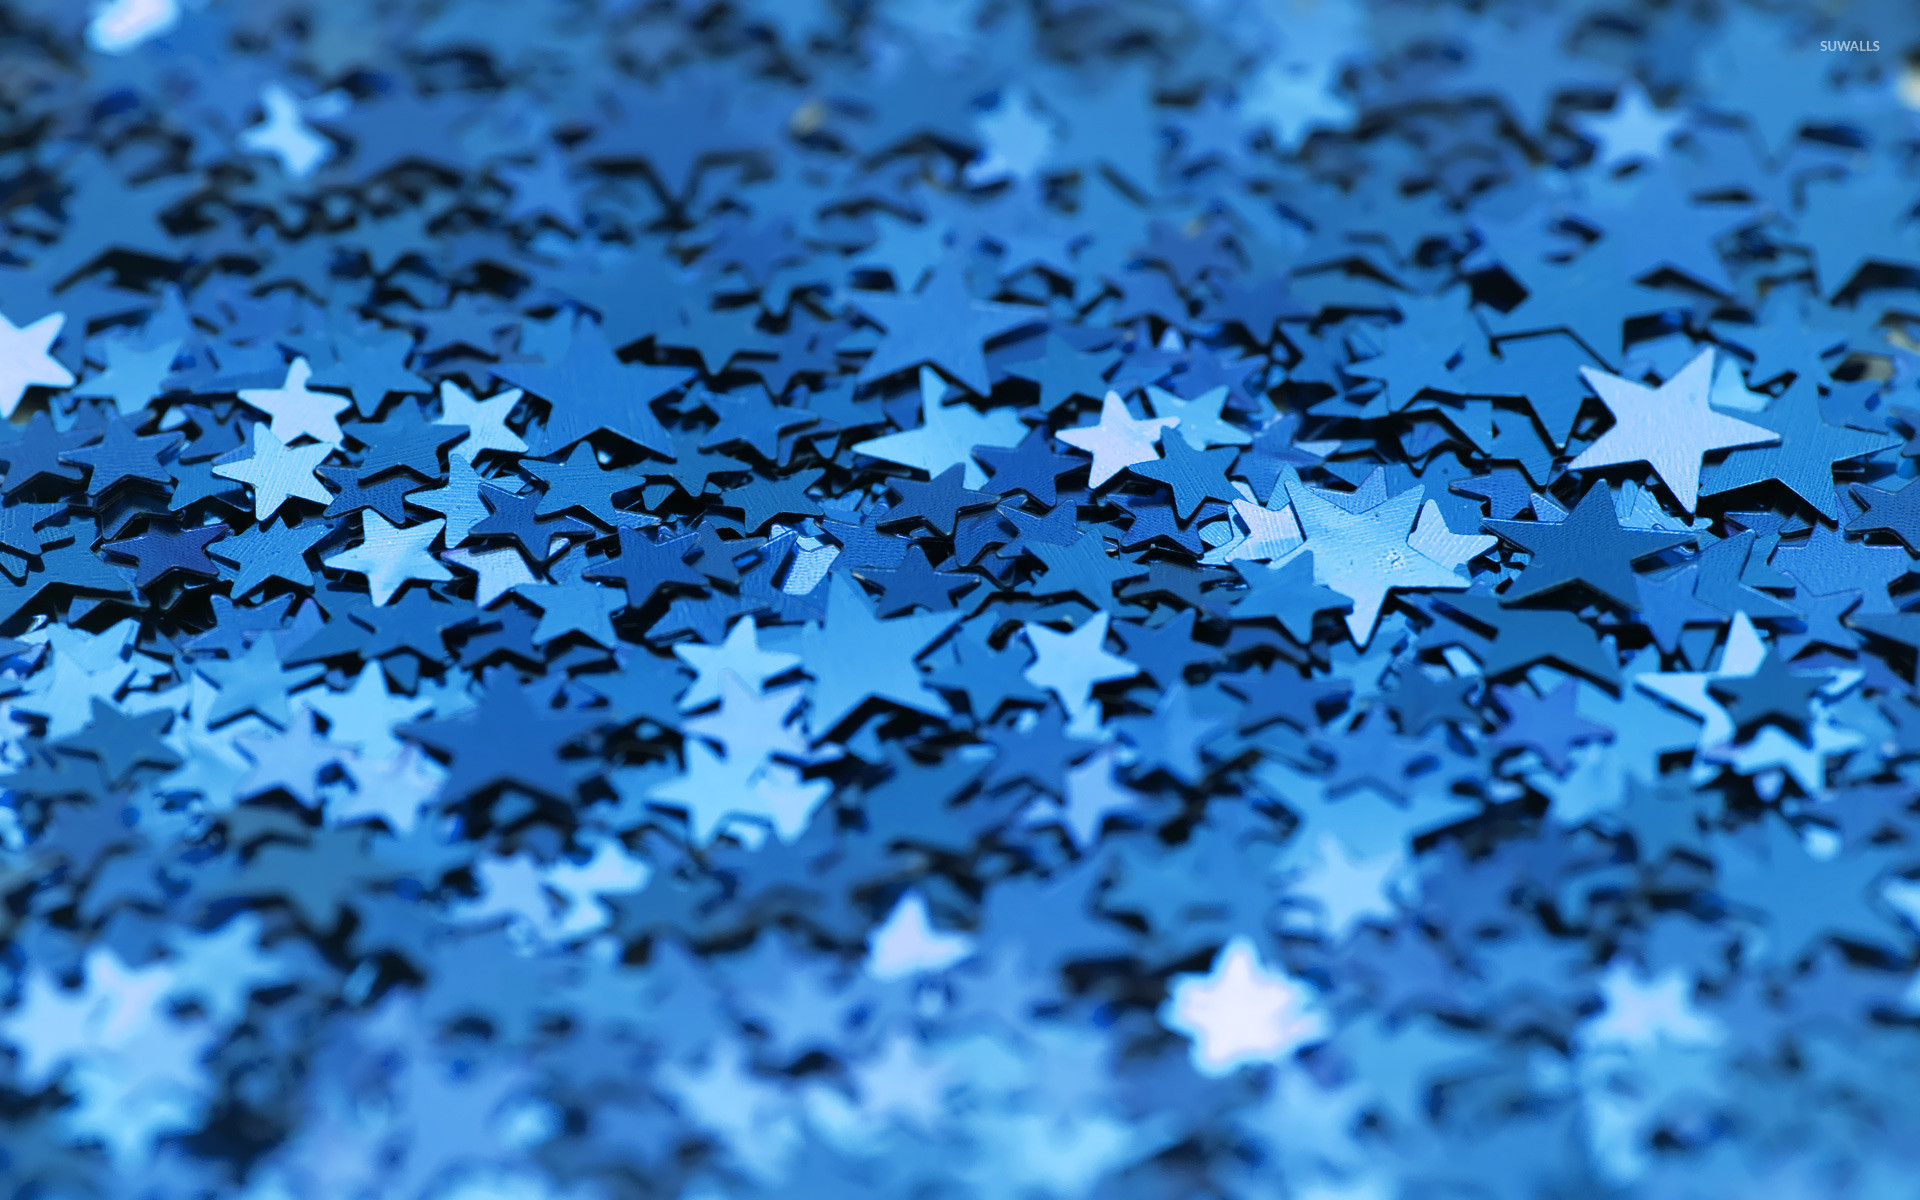 1920x1200 Blue stars wallpaper - Photography wallpapers - #24356